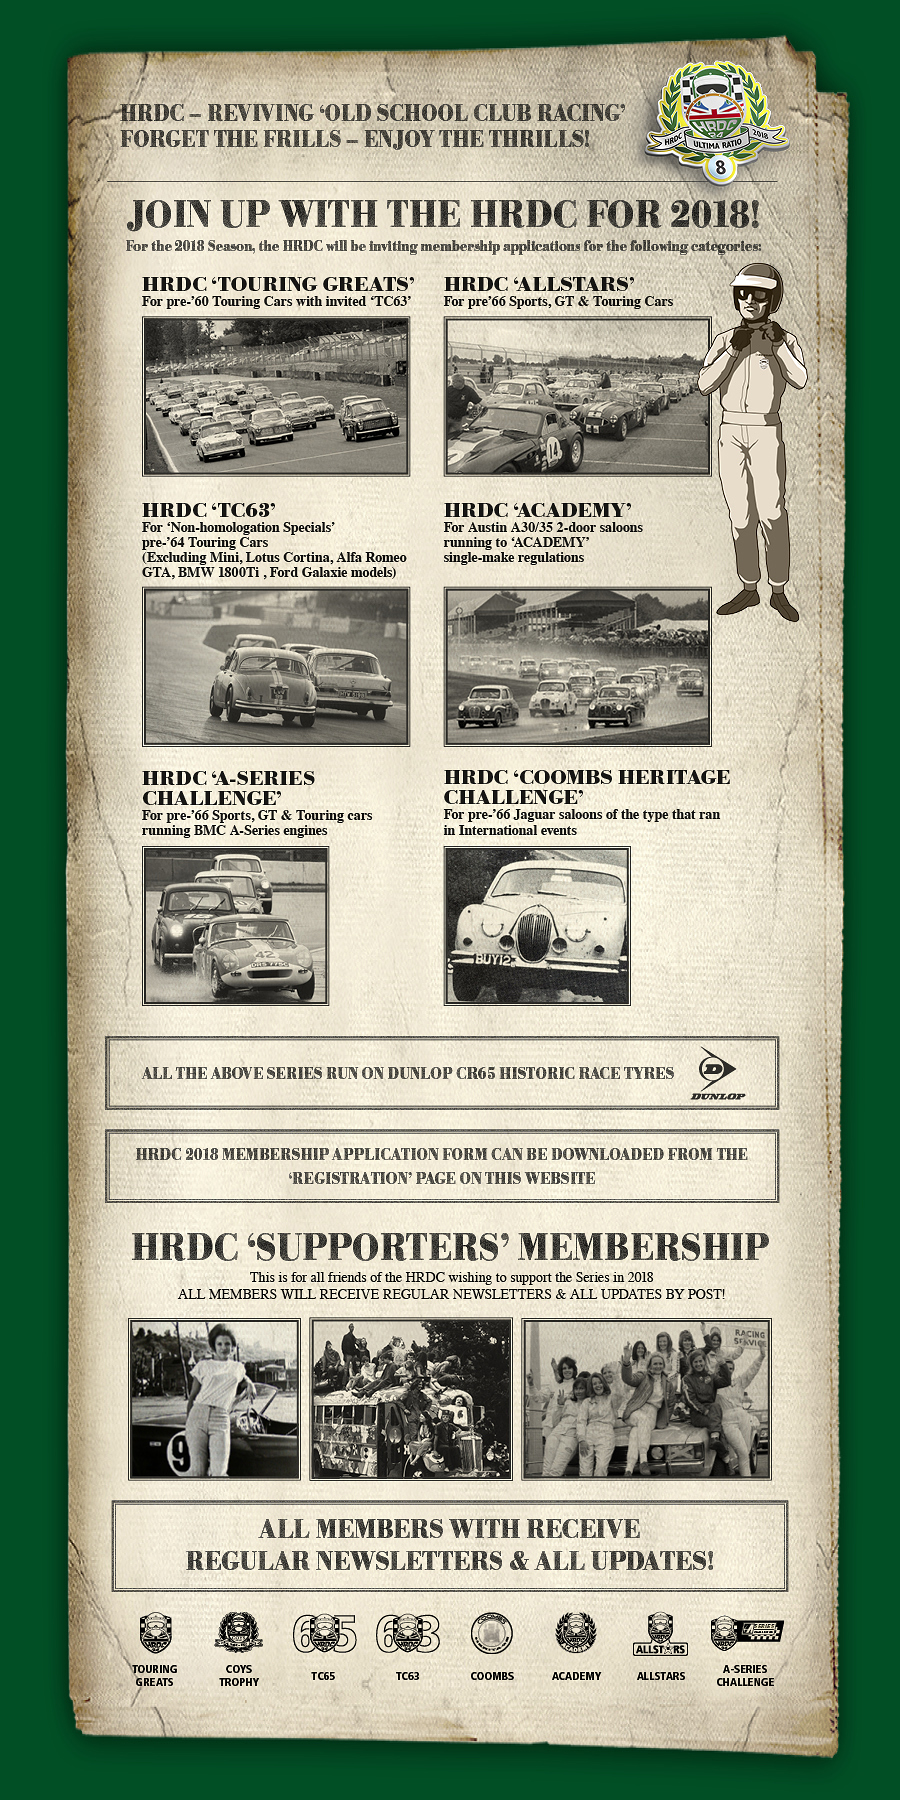 Join up with HRDC for 2018